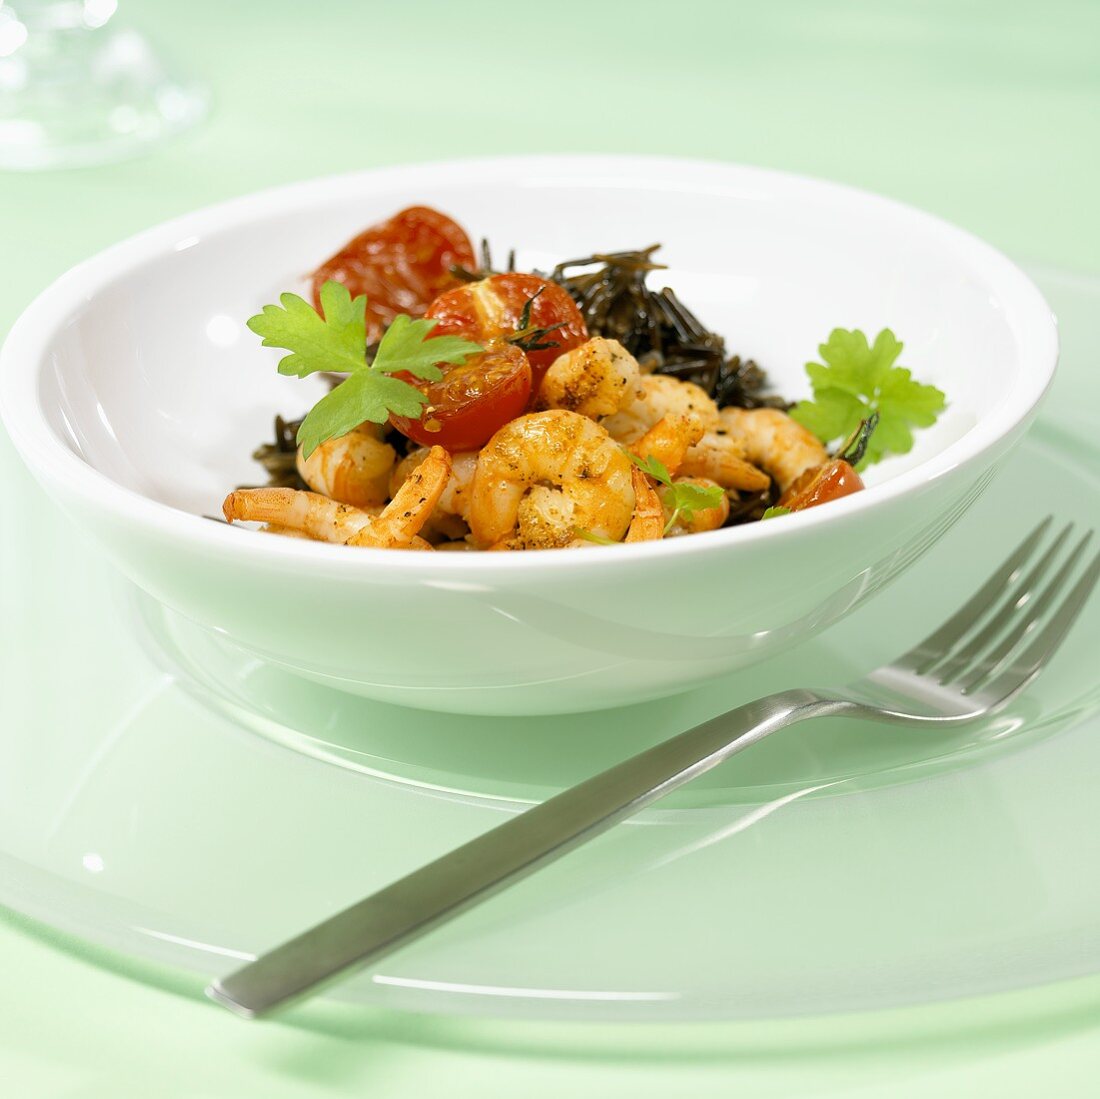 Shrimps with vegetables in a bowl